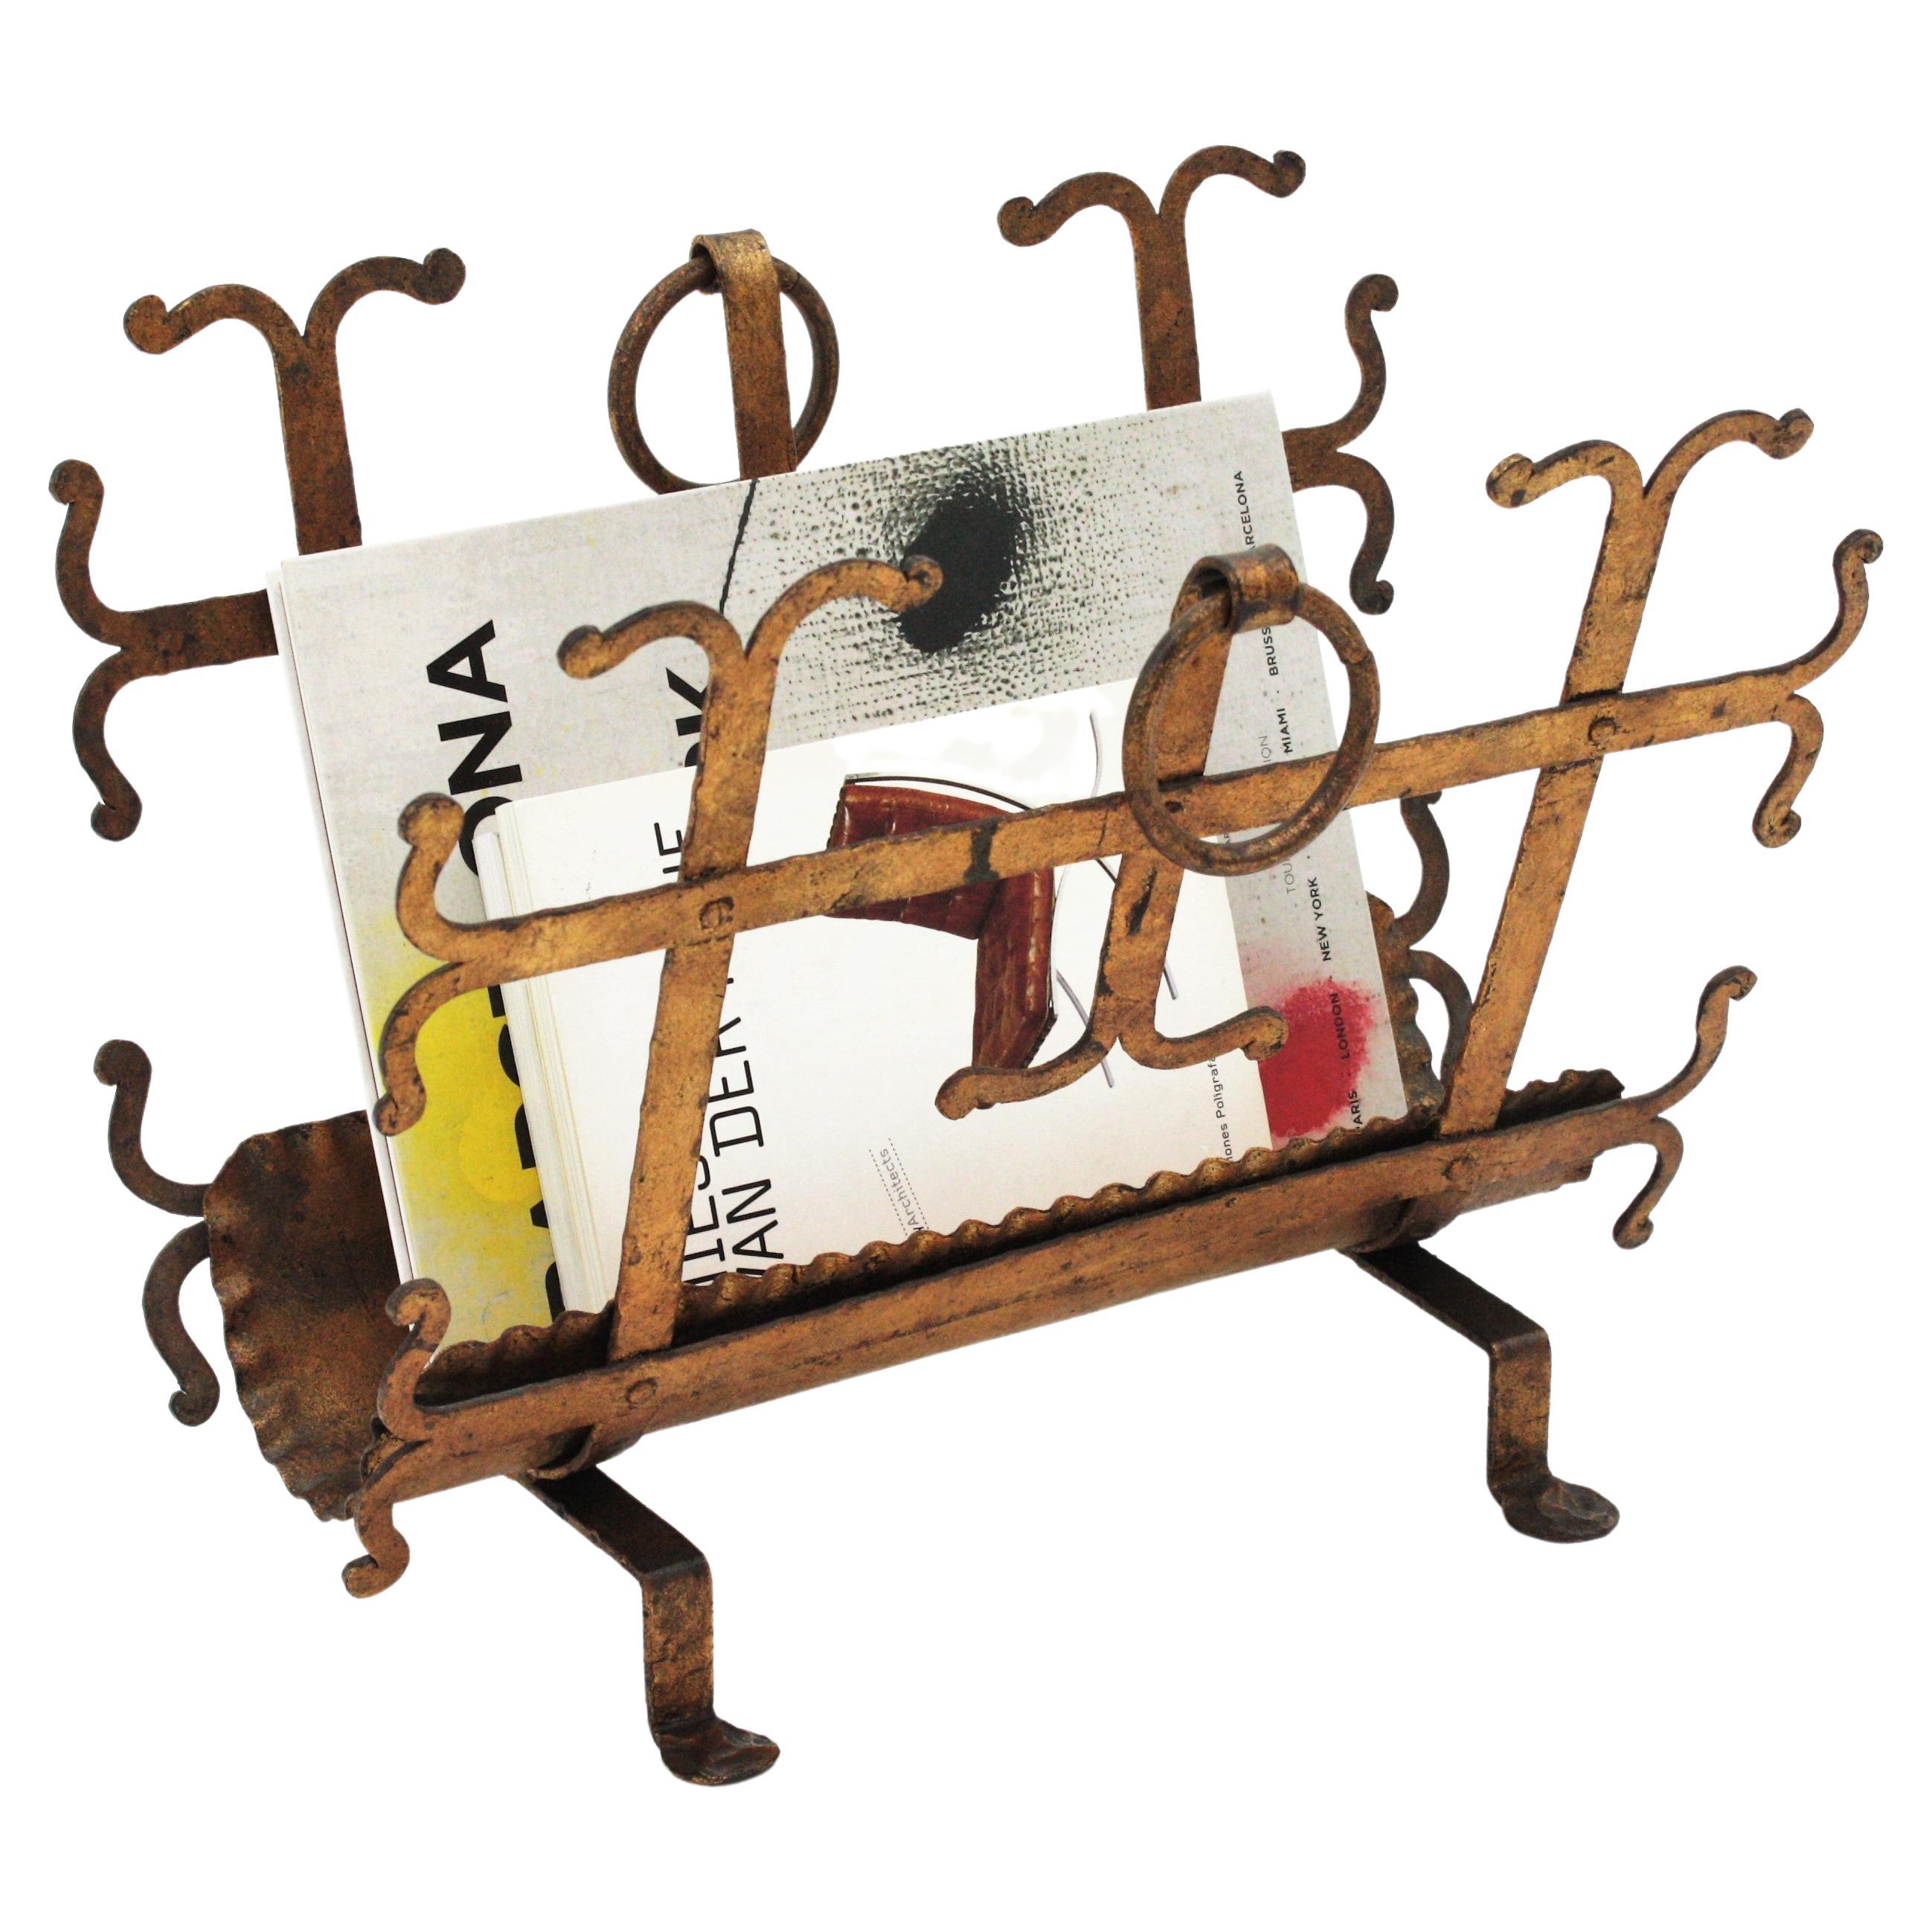 Spanish Revival magazine rack, wrought iron, gold leaf, Spain, 1940s-1950s.
Wrought iron magazine rack with gold leaf finish and Gothic accents.
This hand-hammered magazine or newspapers rack has scrolled details and ring handles at both sides.